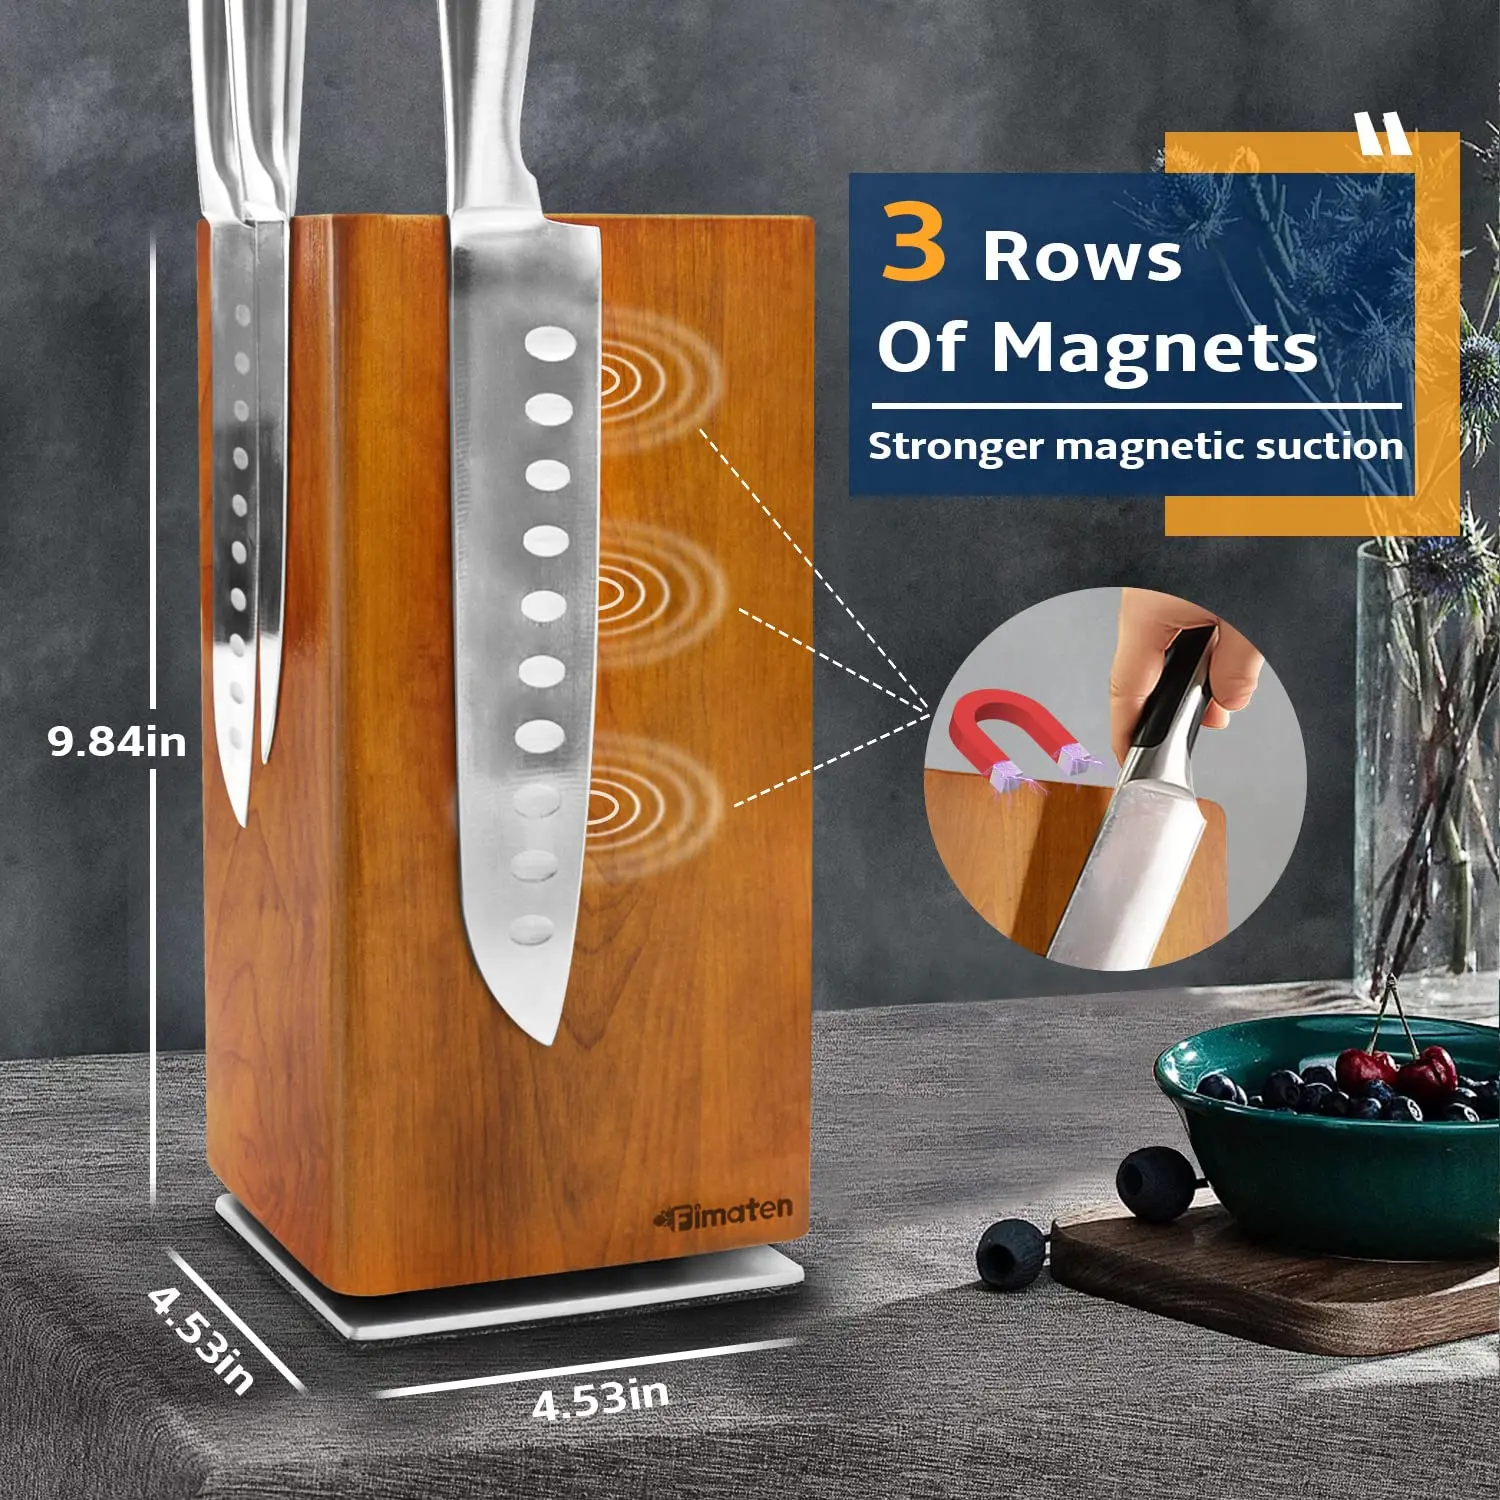 https://ae01.alicdn.com/kf/Sdbd0a7d8ceb74a66970cb927576564cab/Magnetic-Rotating-Wood-Knife-Holder-360-Rotatable-Knife-Block-For-Kitchen-Knives-Storage-With-Anti-Slip.jpg